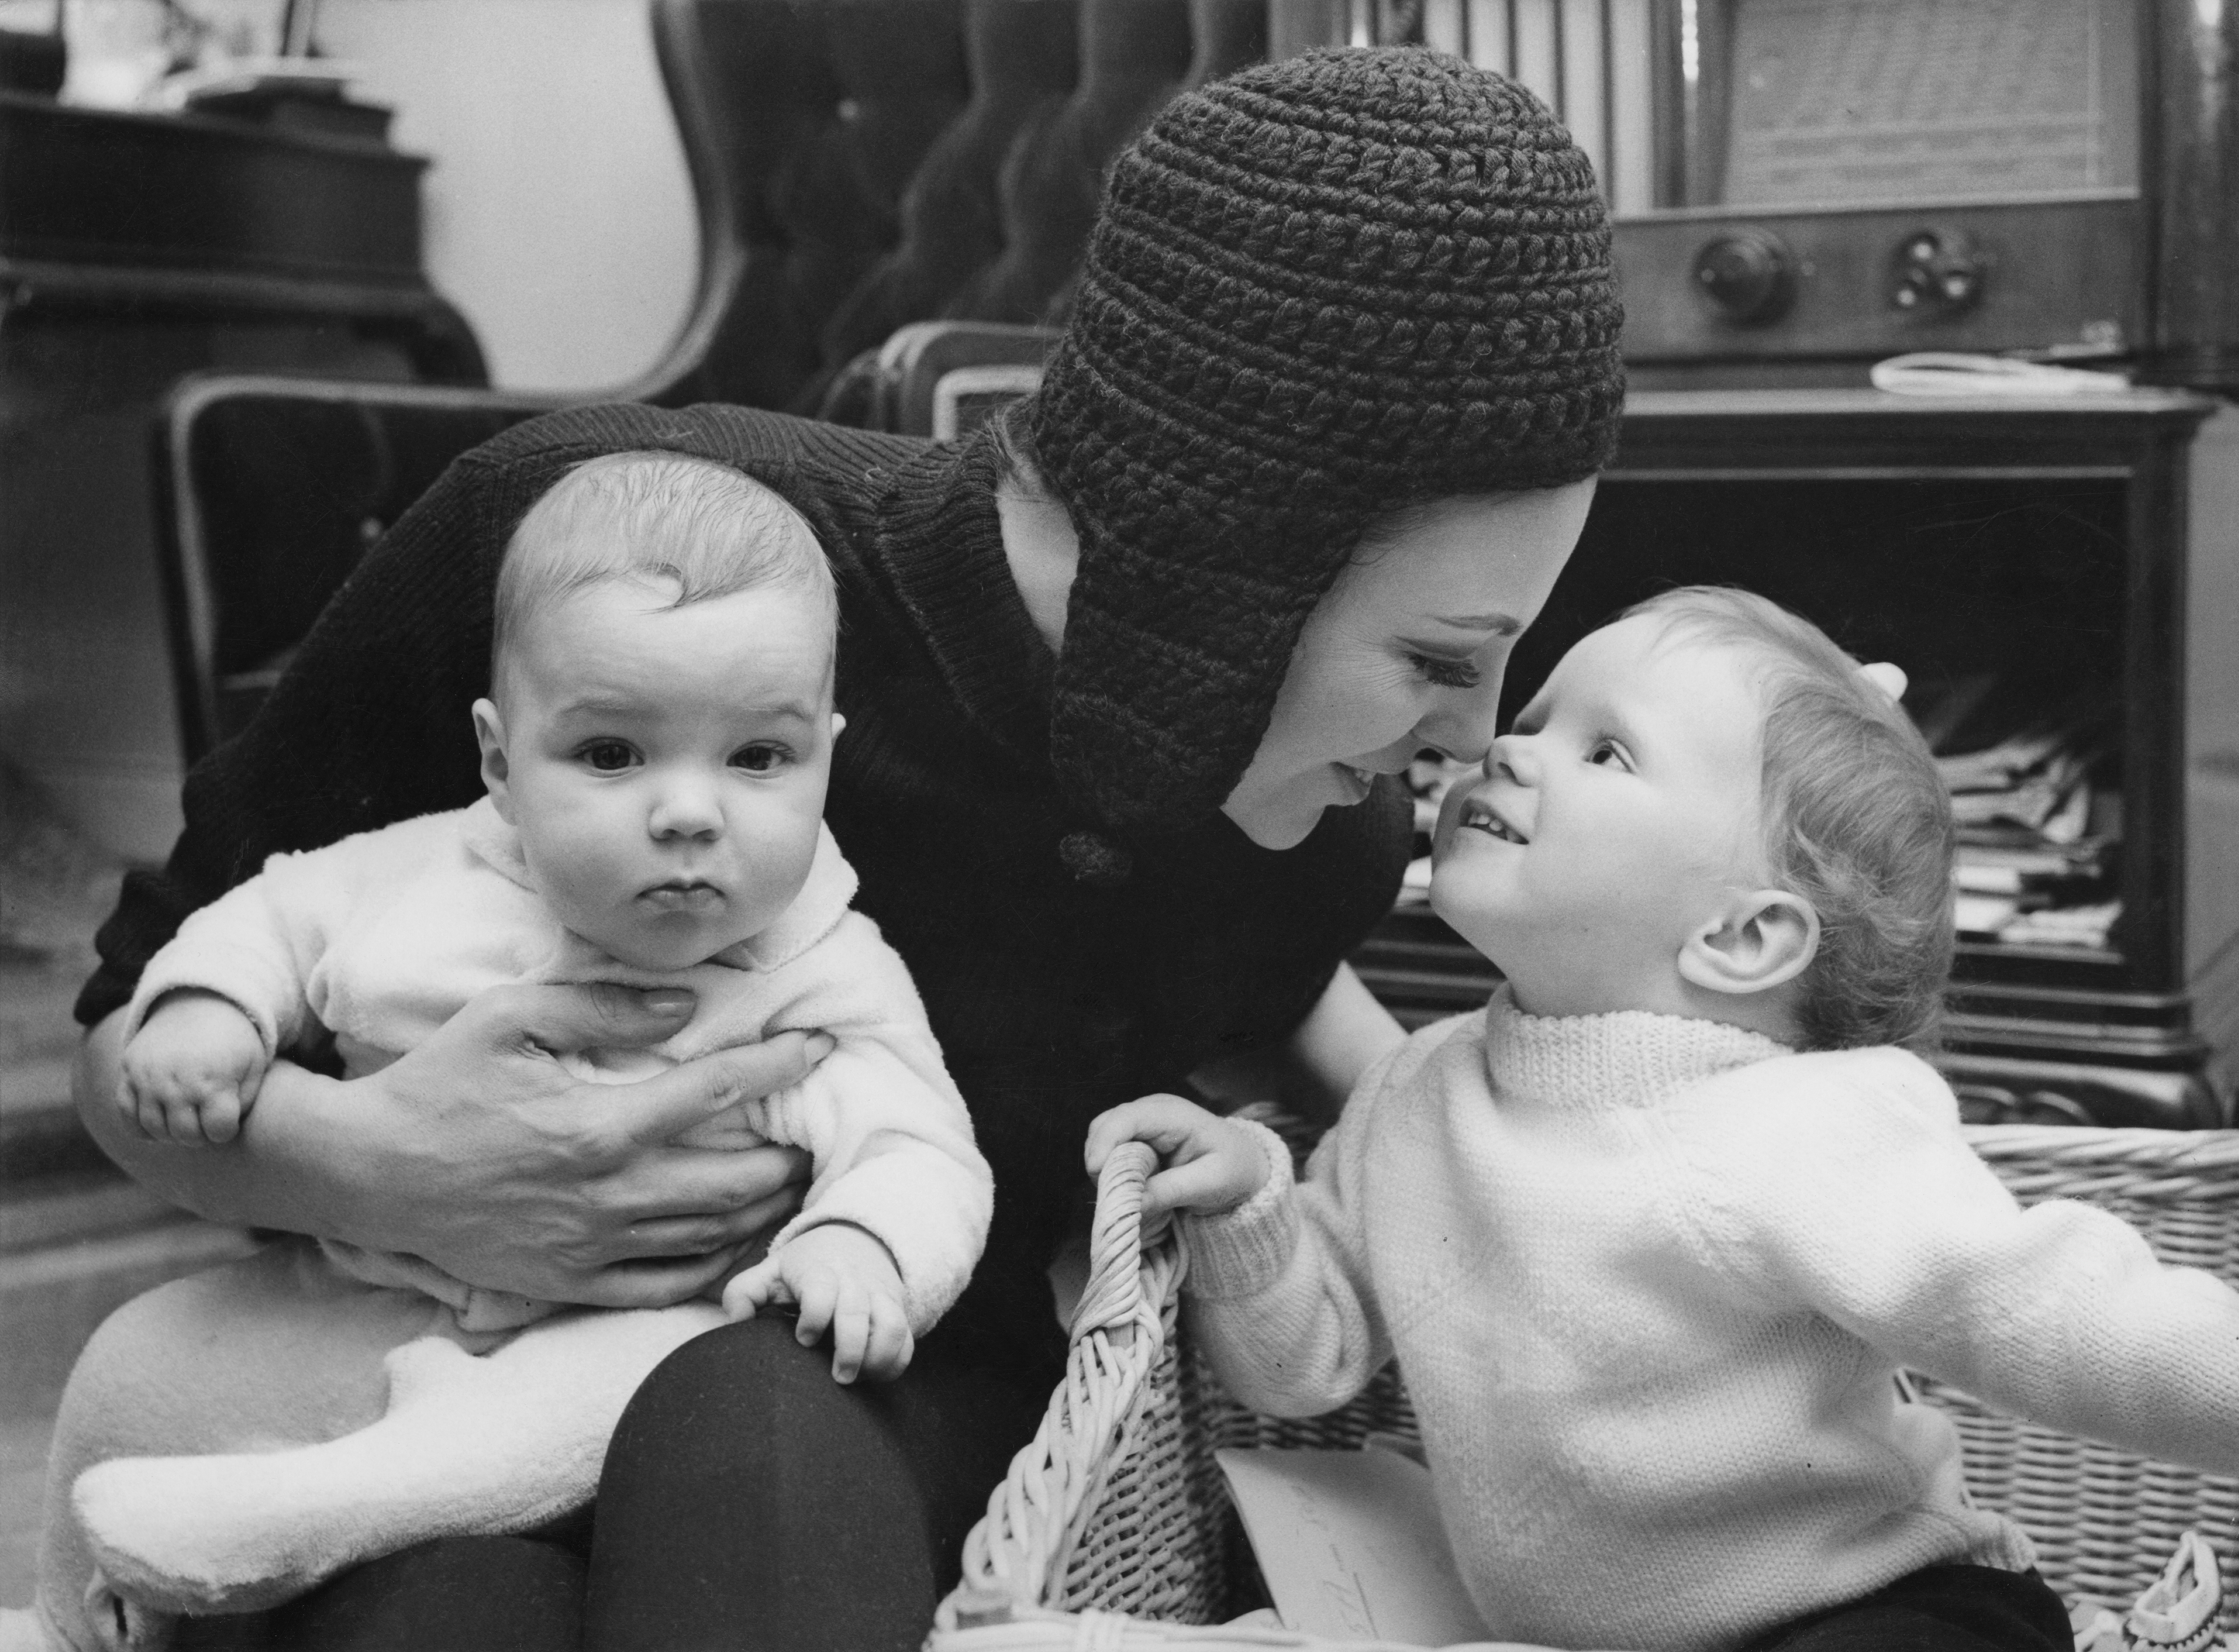 Joan Collins with her daughter Tara Newley (right) and son Alexander Newley, (known as Sacha) in St Moritz, Switzerland, 1966 | Source: Getty Images